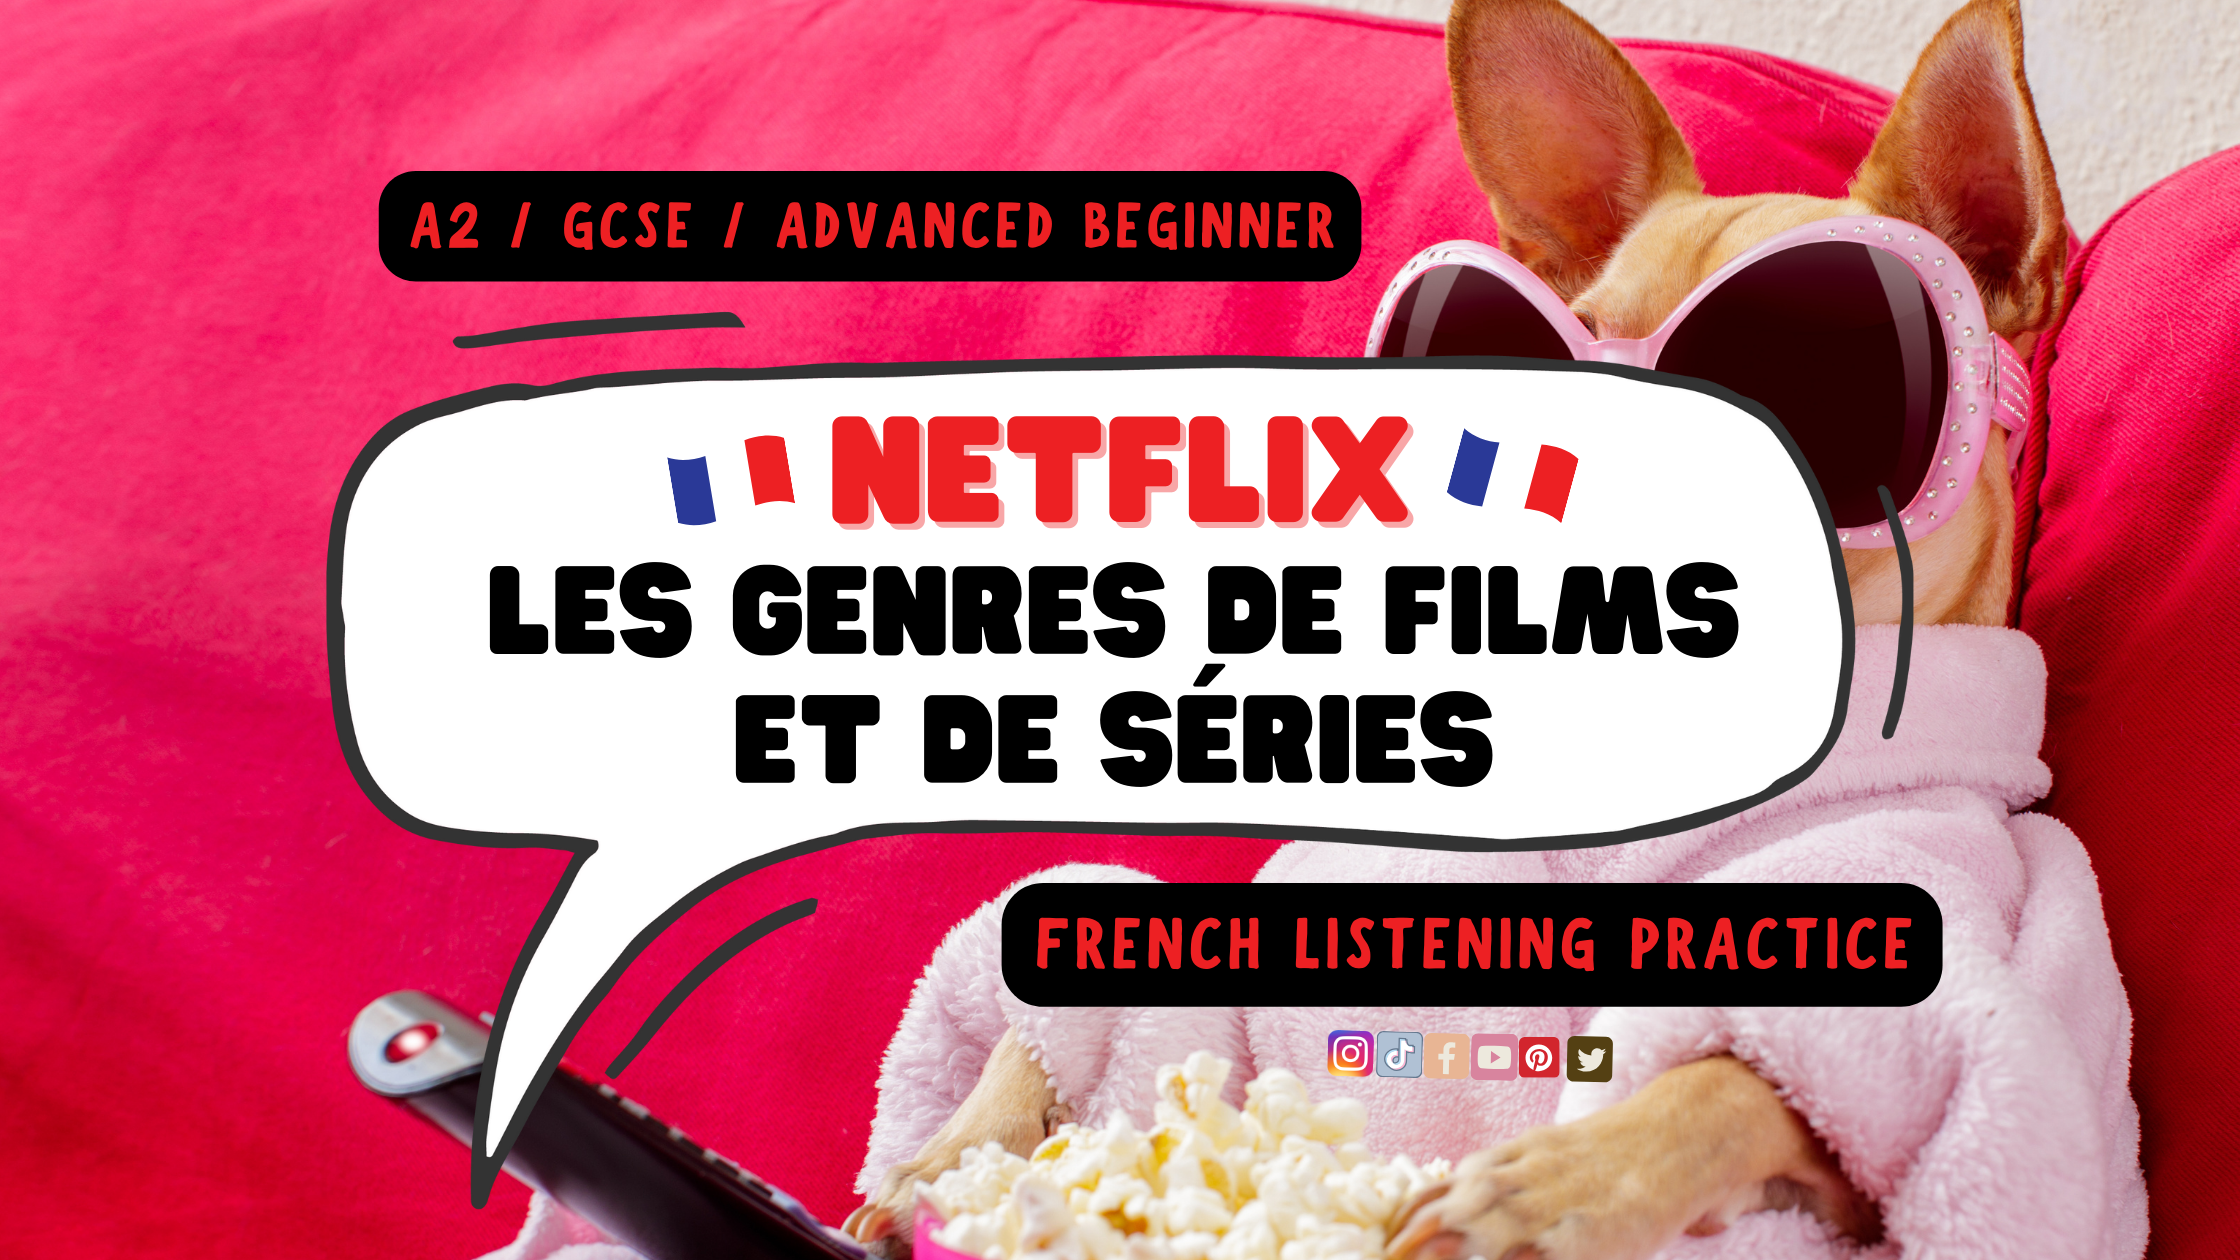 Authentic French Film Genres & Series on Netflix To Know